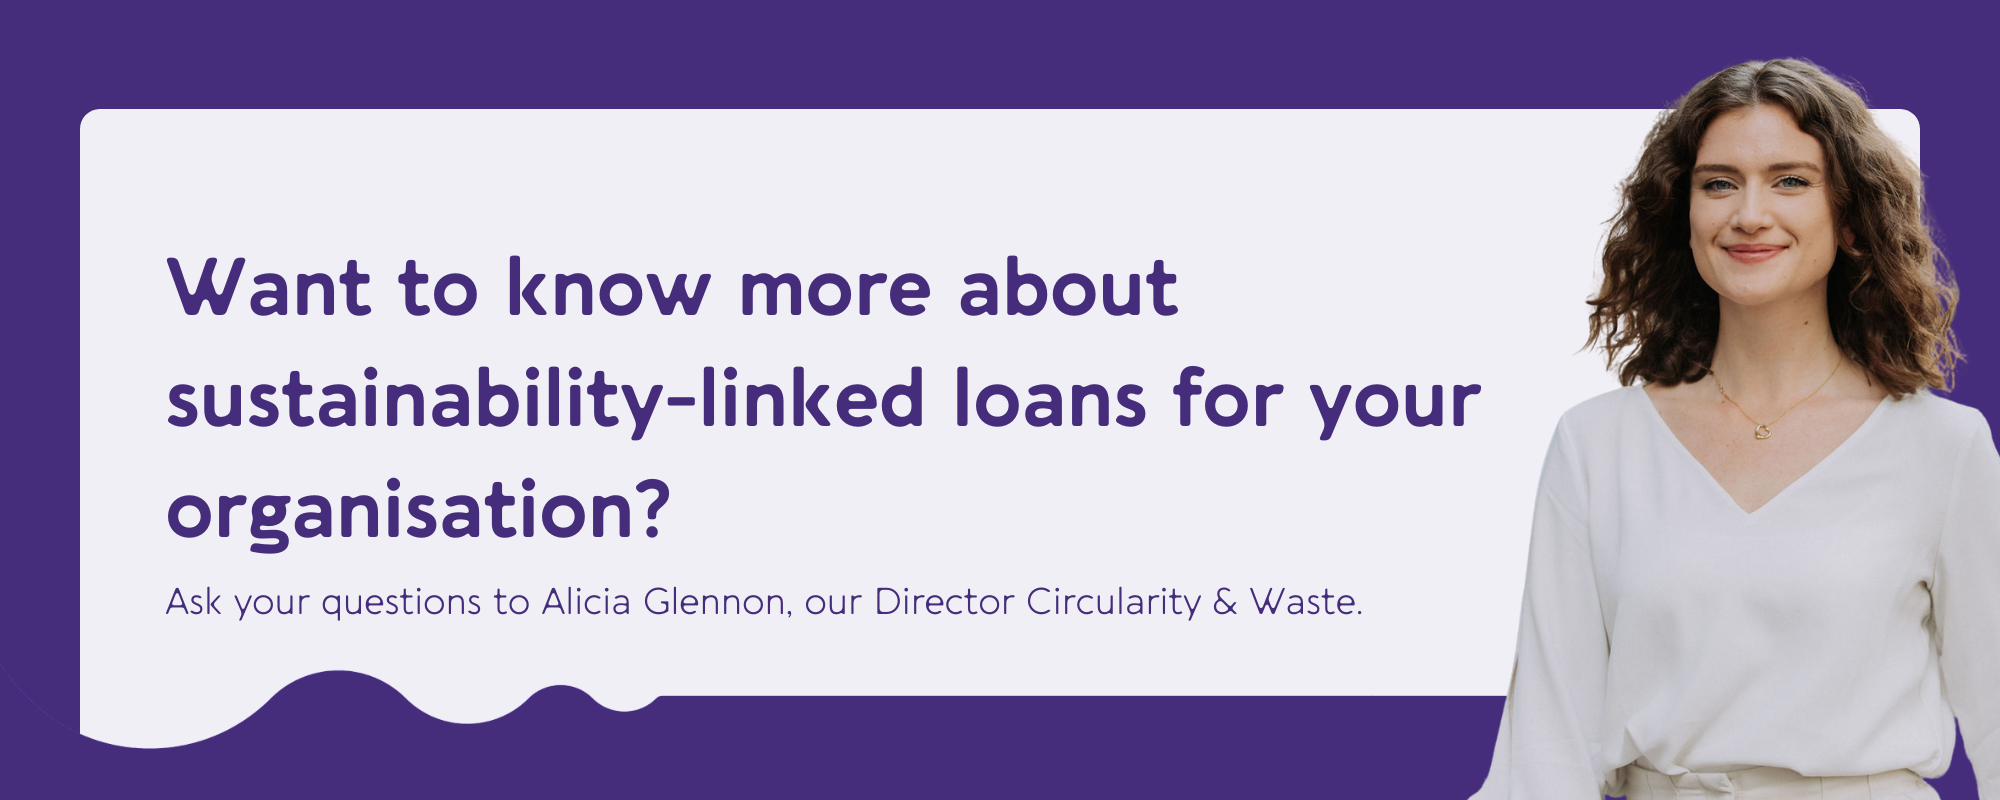 Want to know more about sustainability-linked loans for your organisation?